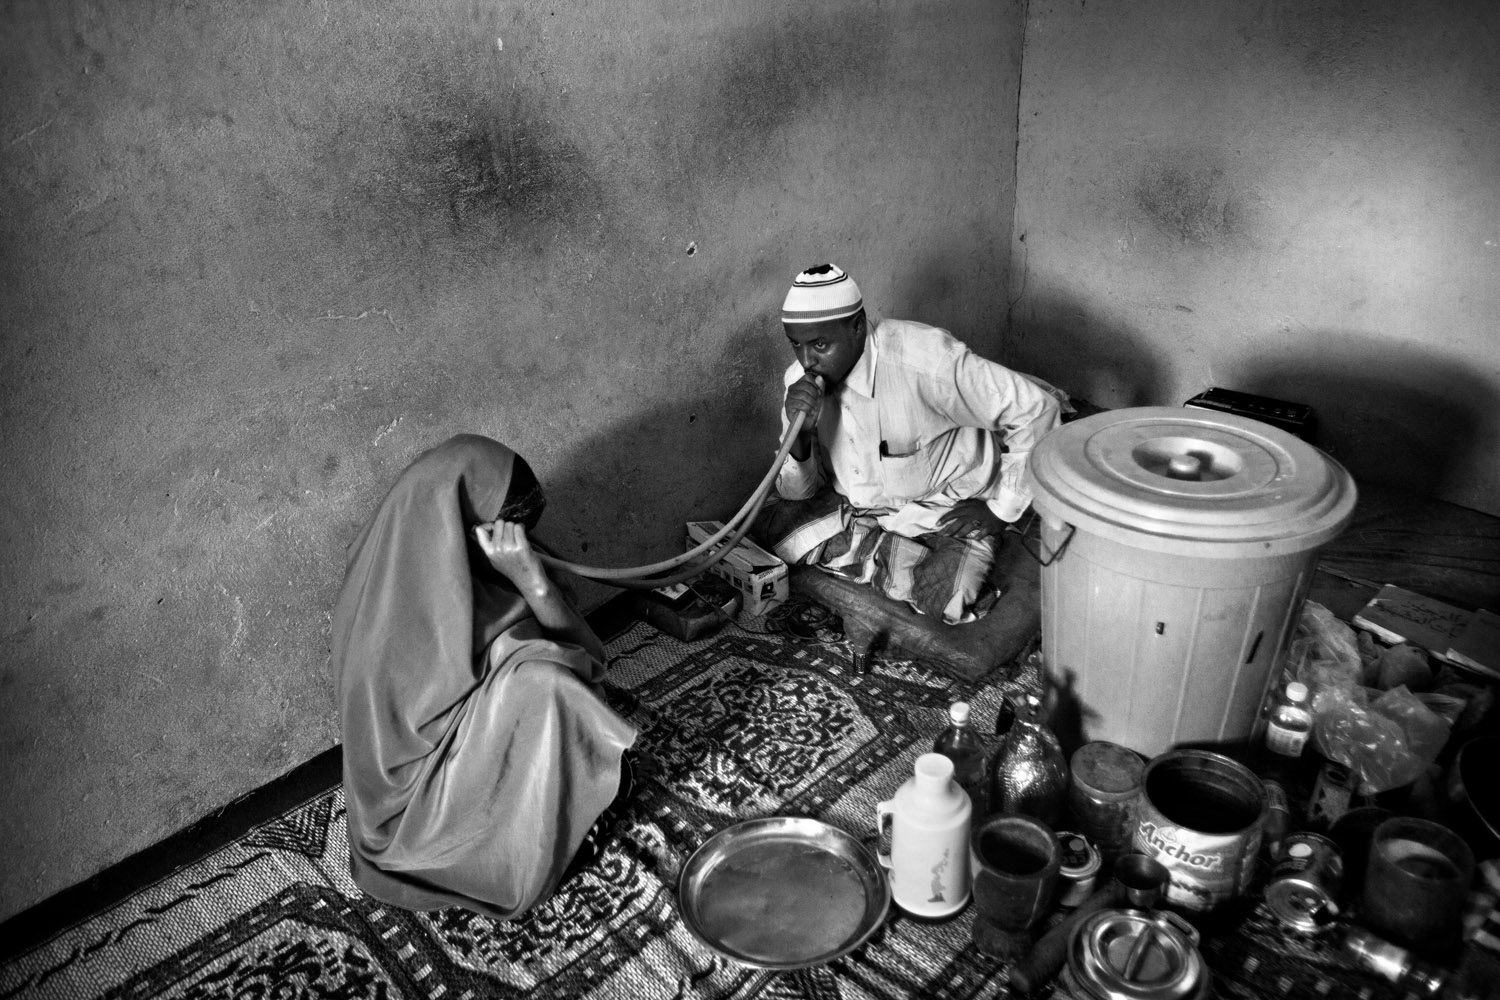 Sheikh Hussein Mahmood Dirir, Khoranic healer and Director of The Healing Centre treats a patient with a mental illness by reciting The Khoran to her. Hargeisa, Somaliland. May, 2011. Photo Robin Hammond/Panos